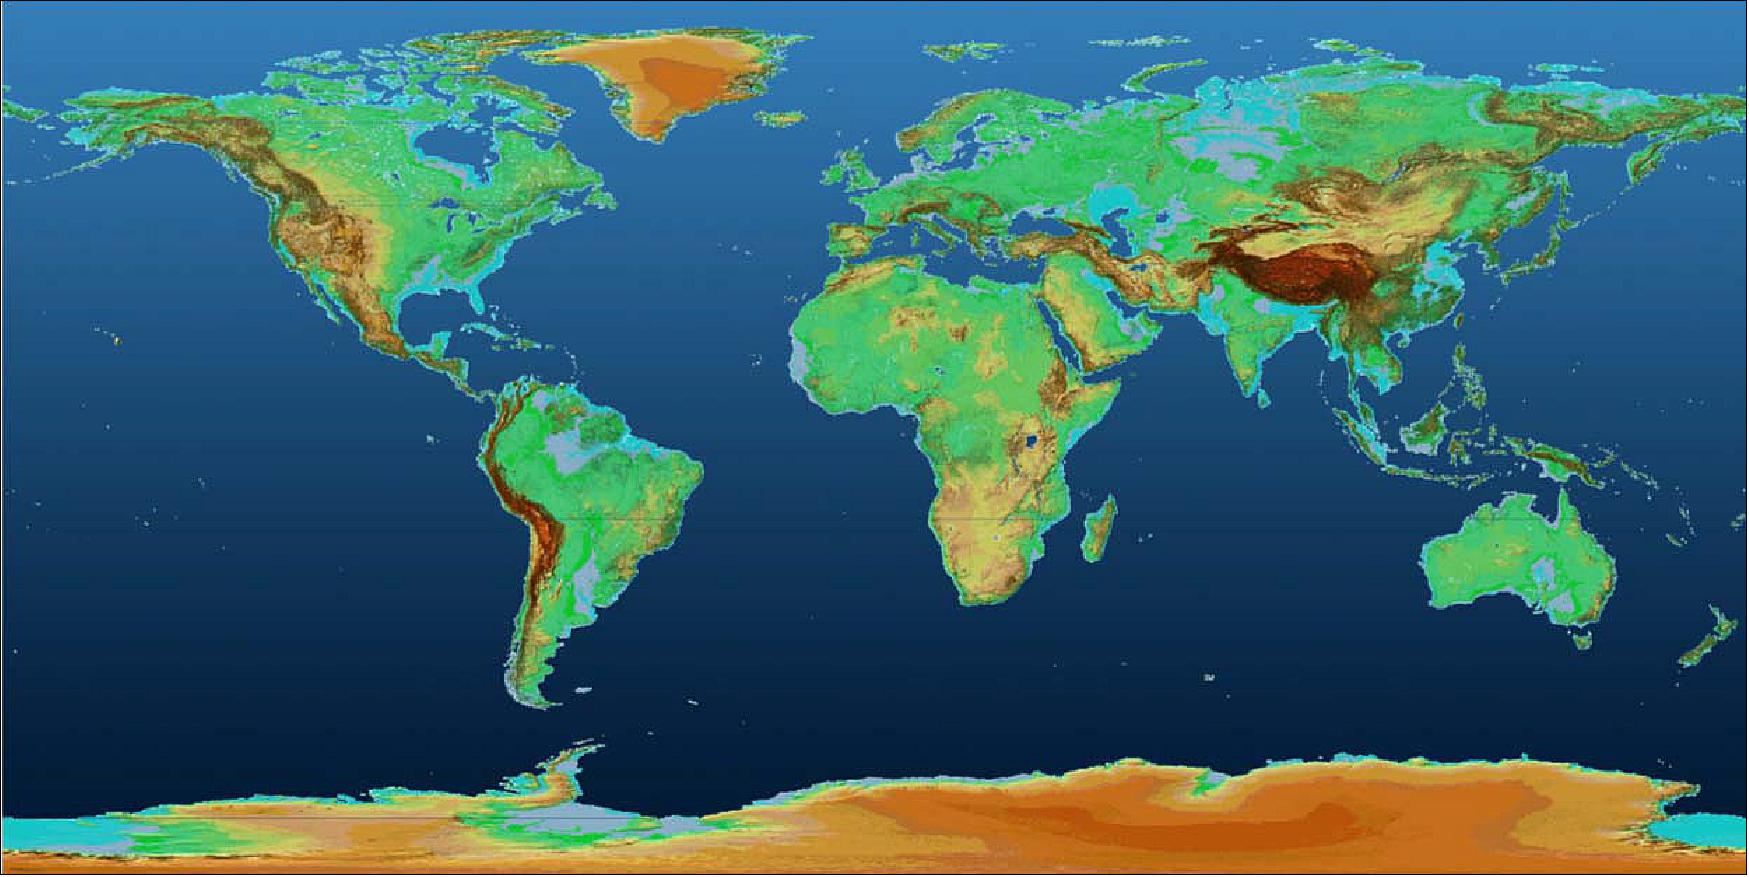 Figure 39: The global TanDEM-X DEM is a consistent data set covering all land surfaces at unprecedented absolute height accuracy of about 1m at a horizontal sampling of 12 m by 12 m. Between 2011 and 2014 at least two acquisitions have been collected by the bistatic TanDEM-X SAR interferometer, mountainous areas have covered up to six times (image credit: DLR)